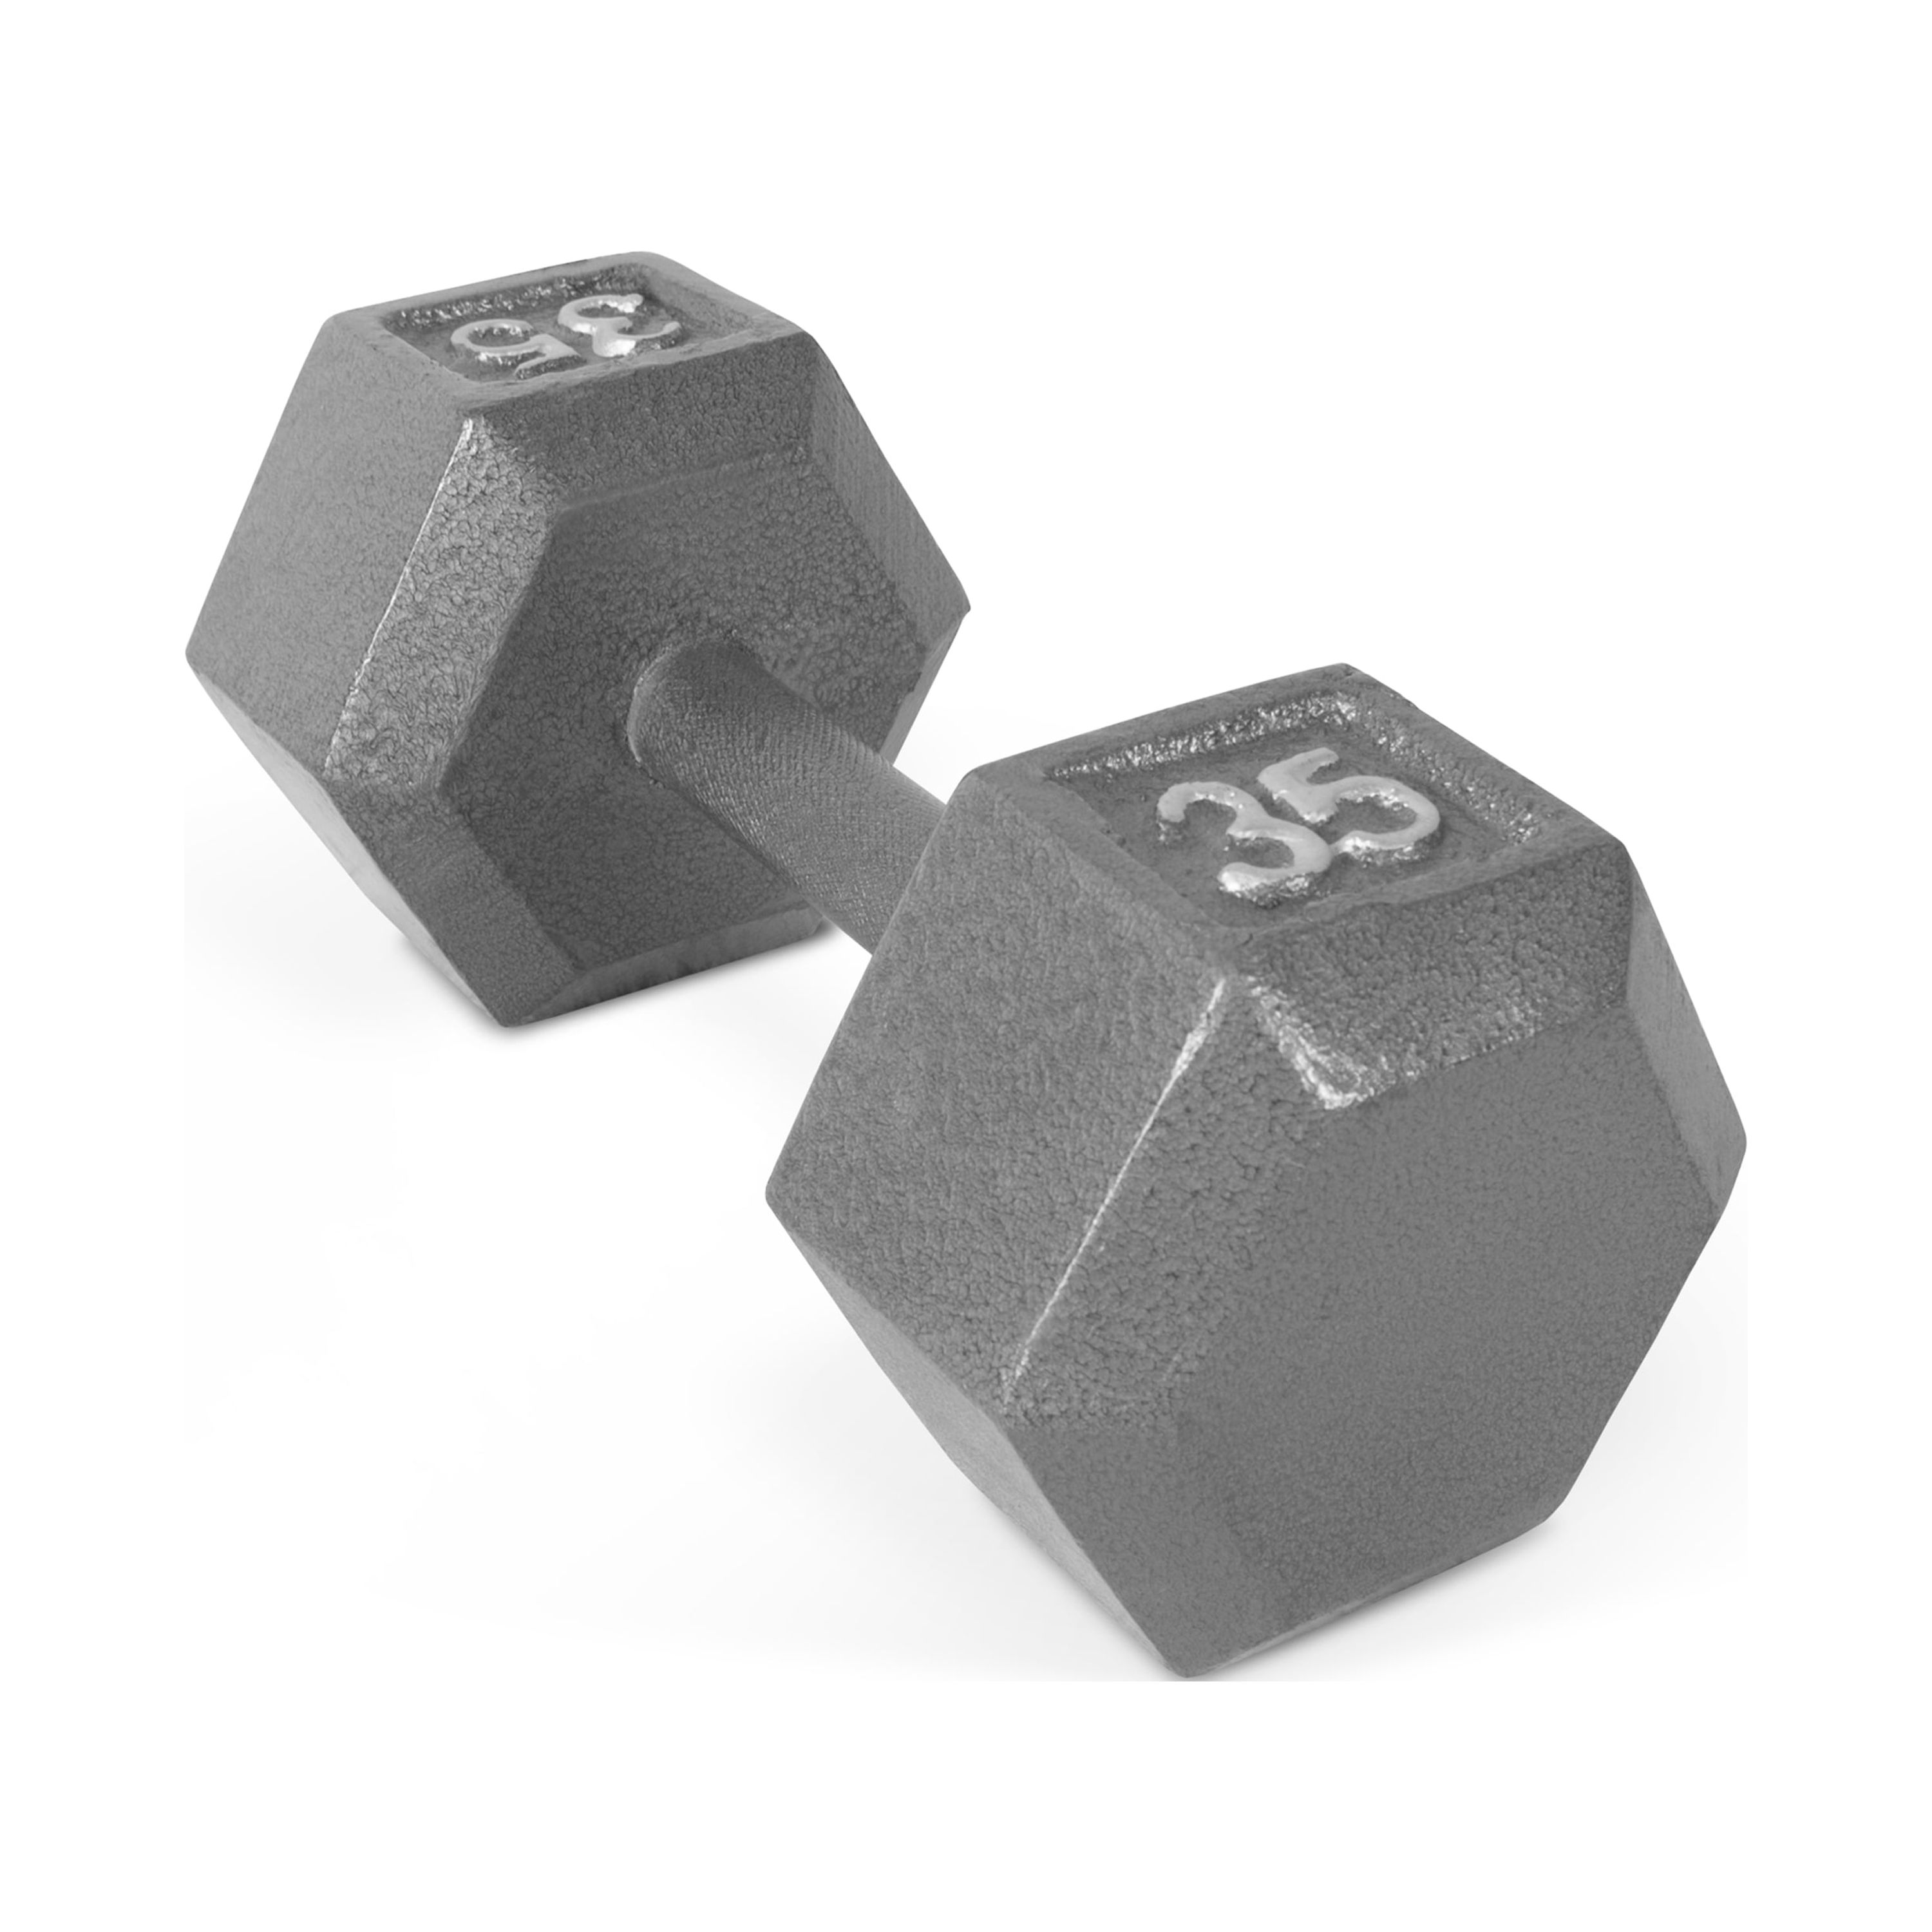 CAP Barbell 35lb Cast Iron Hex Dumbbell, Single - image 1 of 6